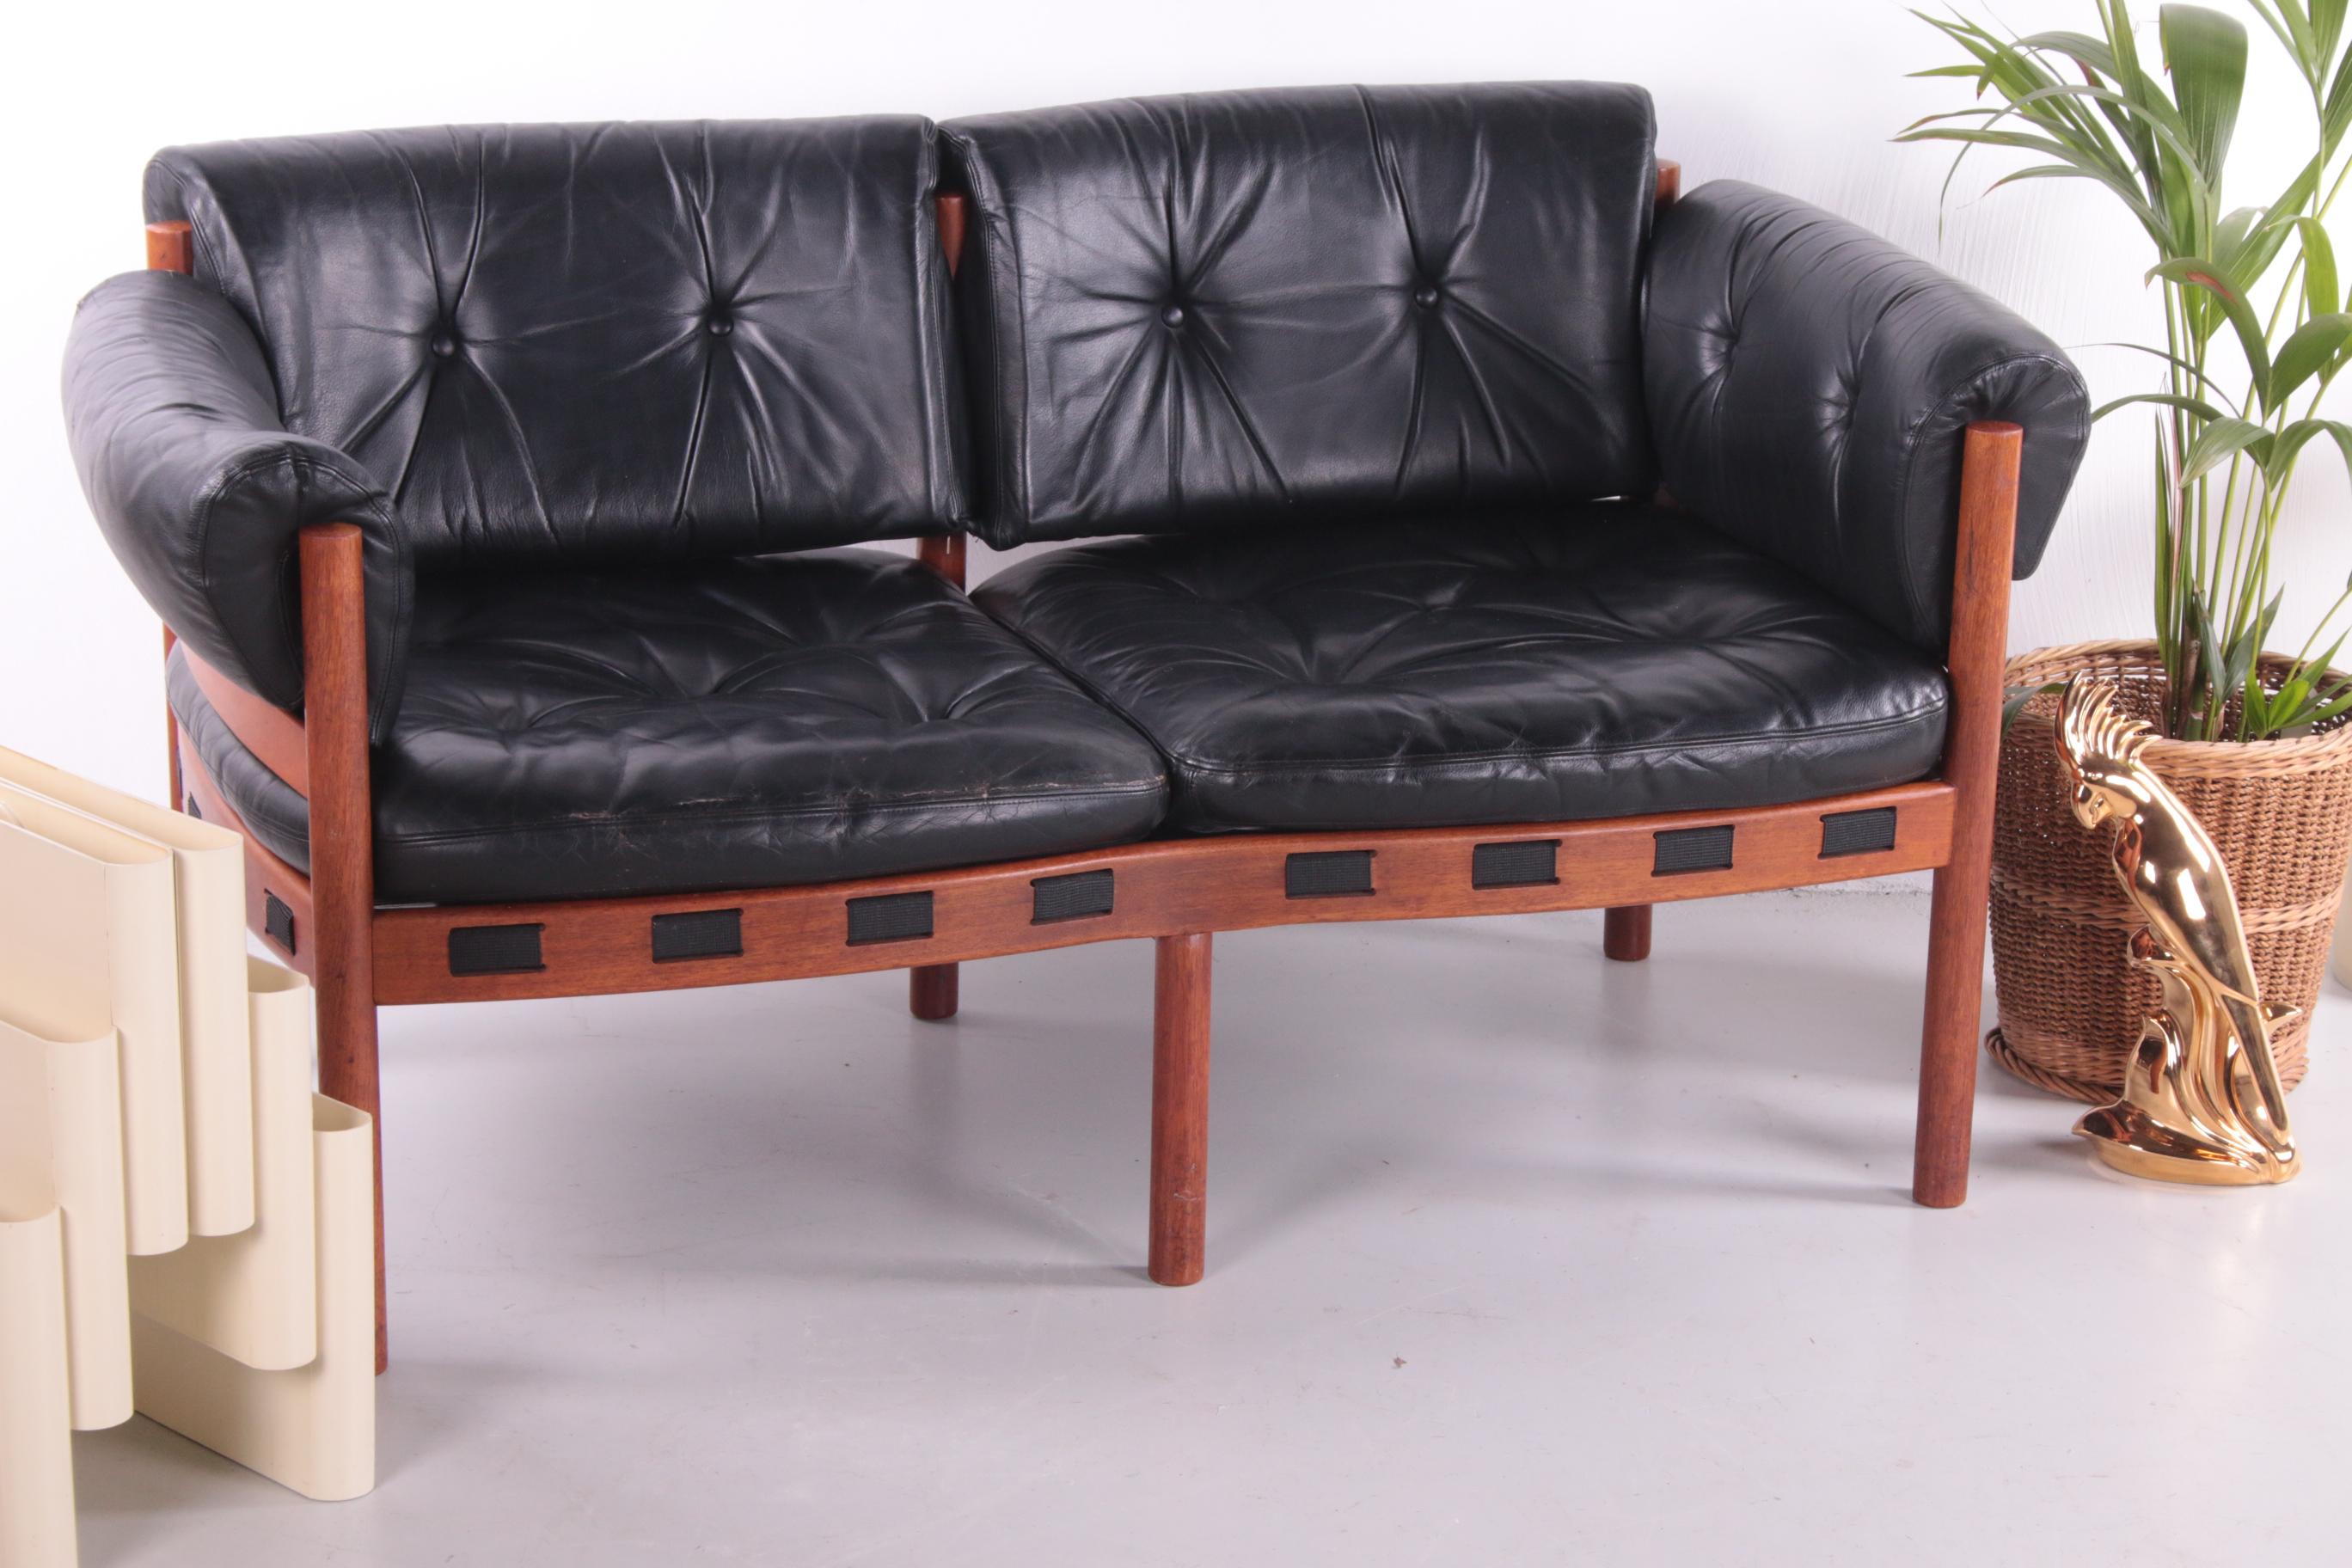 A beautiful vintage designer sofa from the seventies.

Designed by Swedish designer Sven Ellekaer for Coja. His signature mid-century Scandinavian style is easily recognized in this beautiful piece of furniture.

The sofa has a black leather